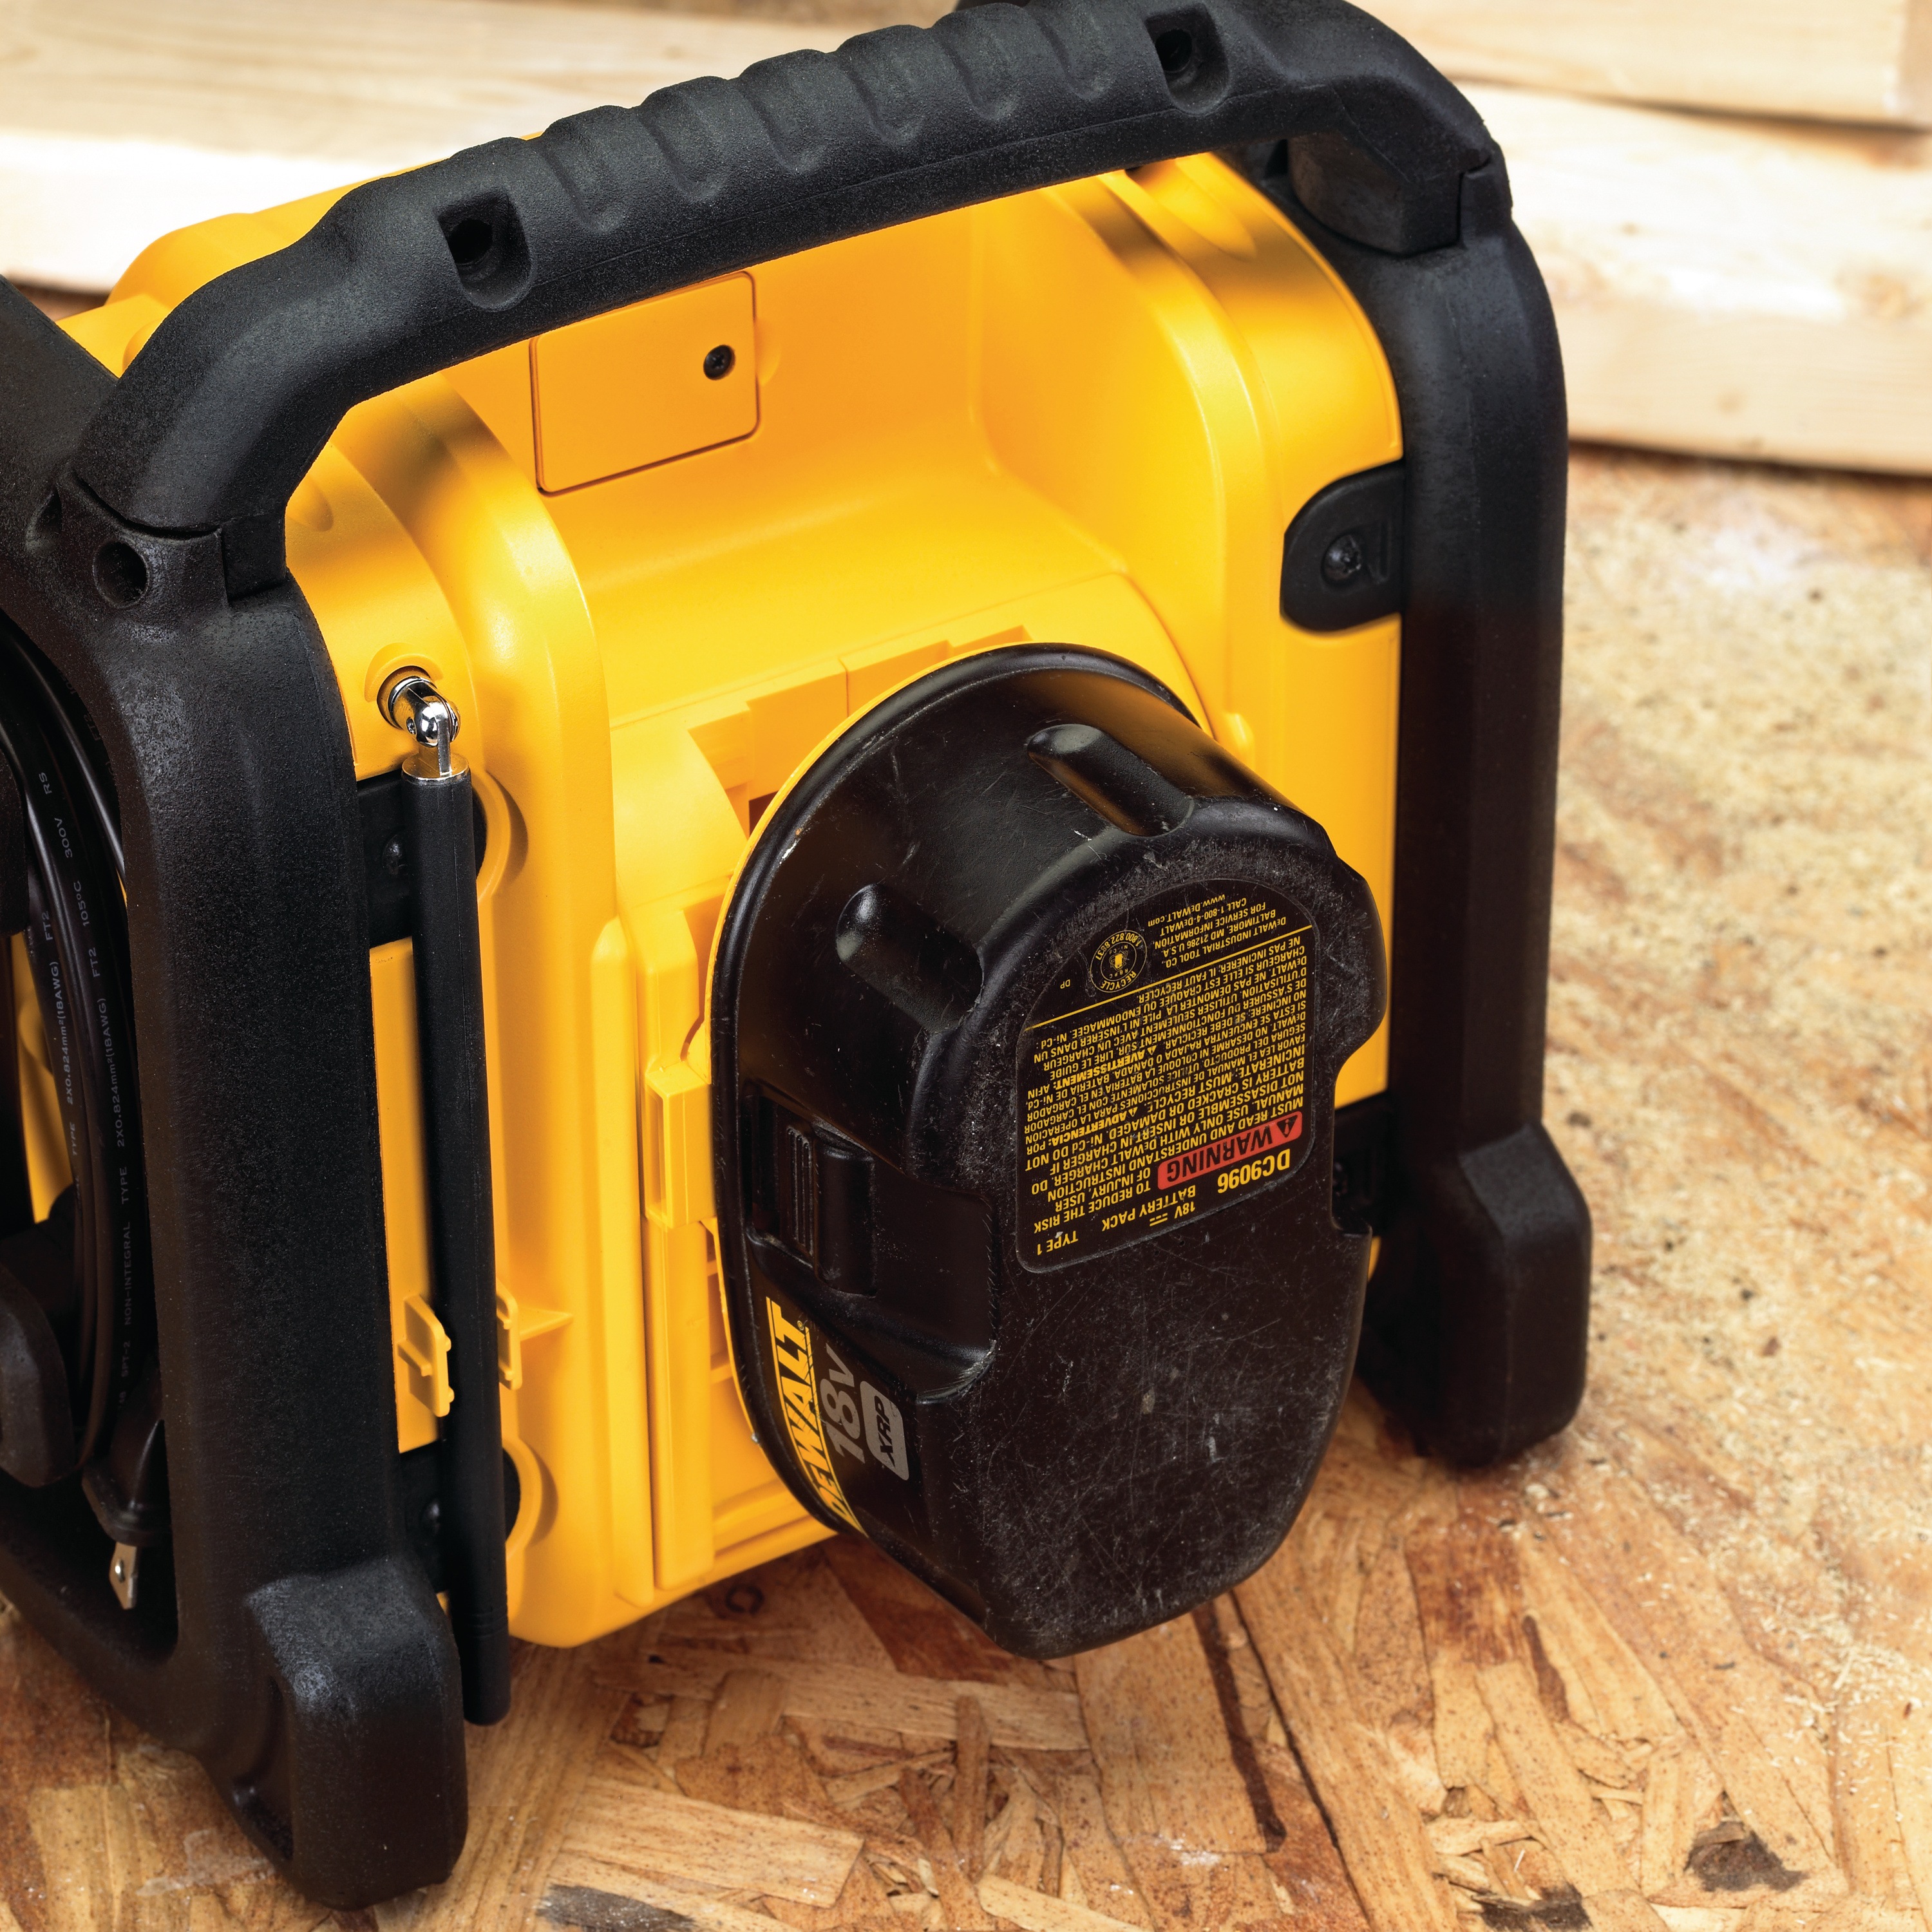 Separate charger feature of Compact Worksite Radio.